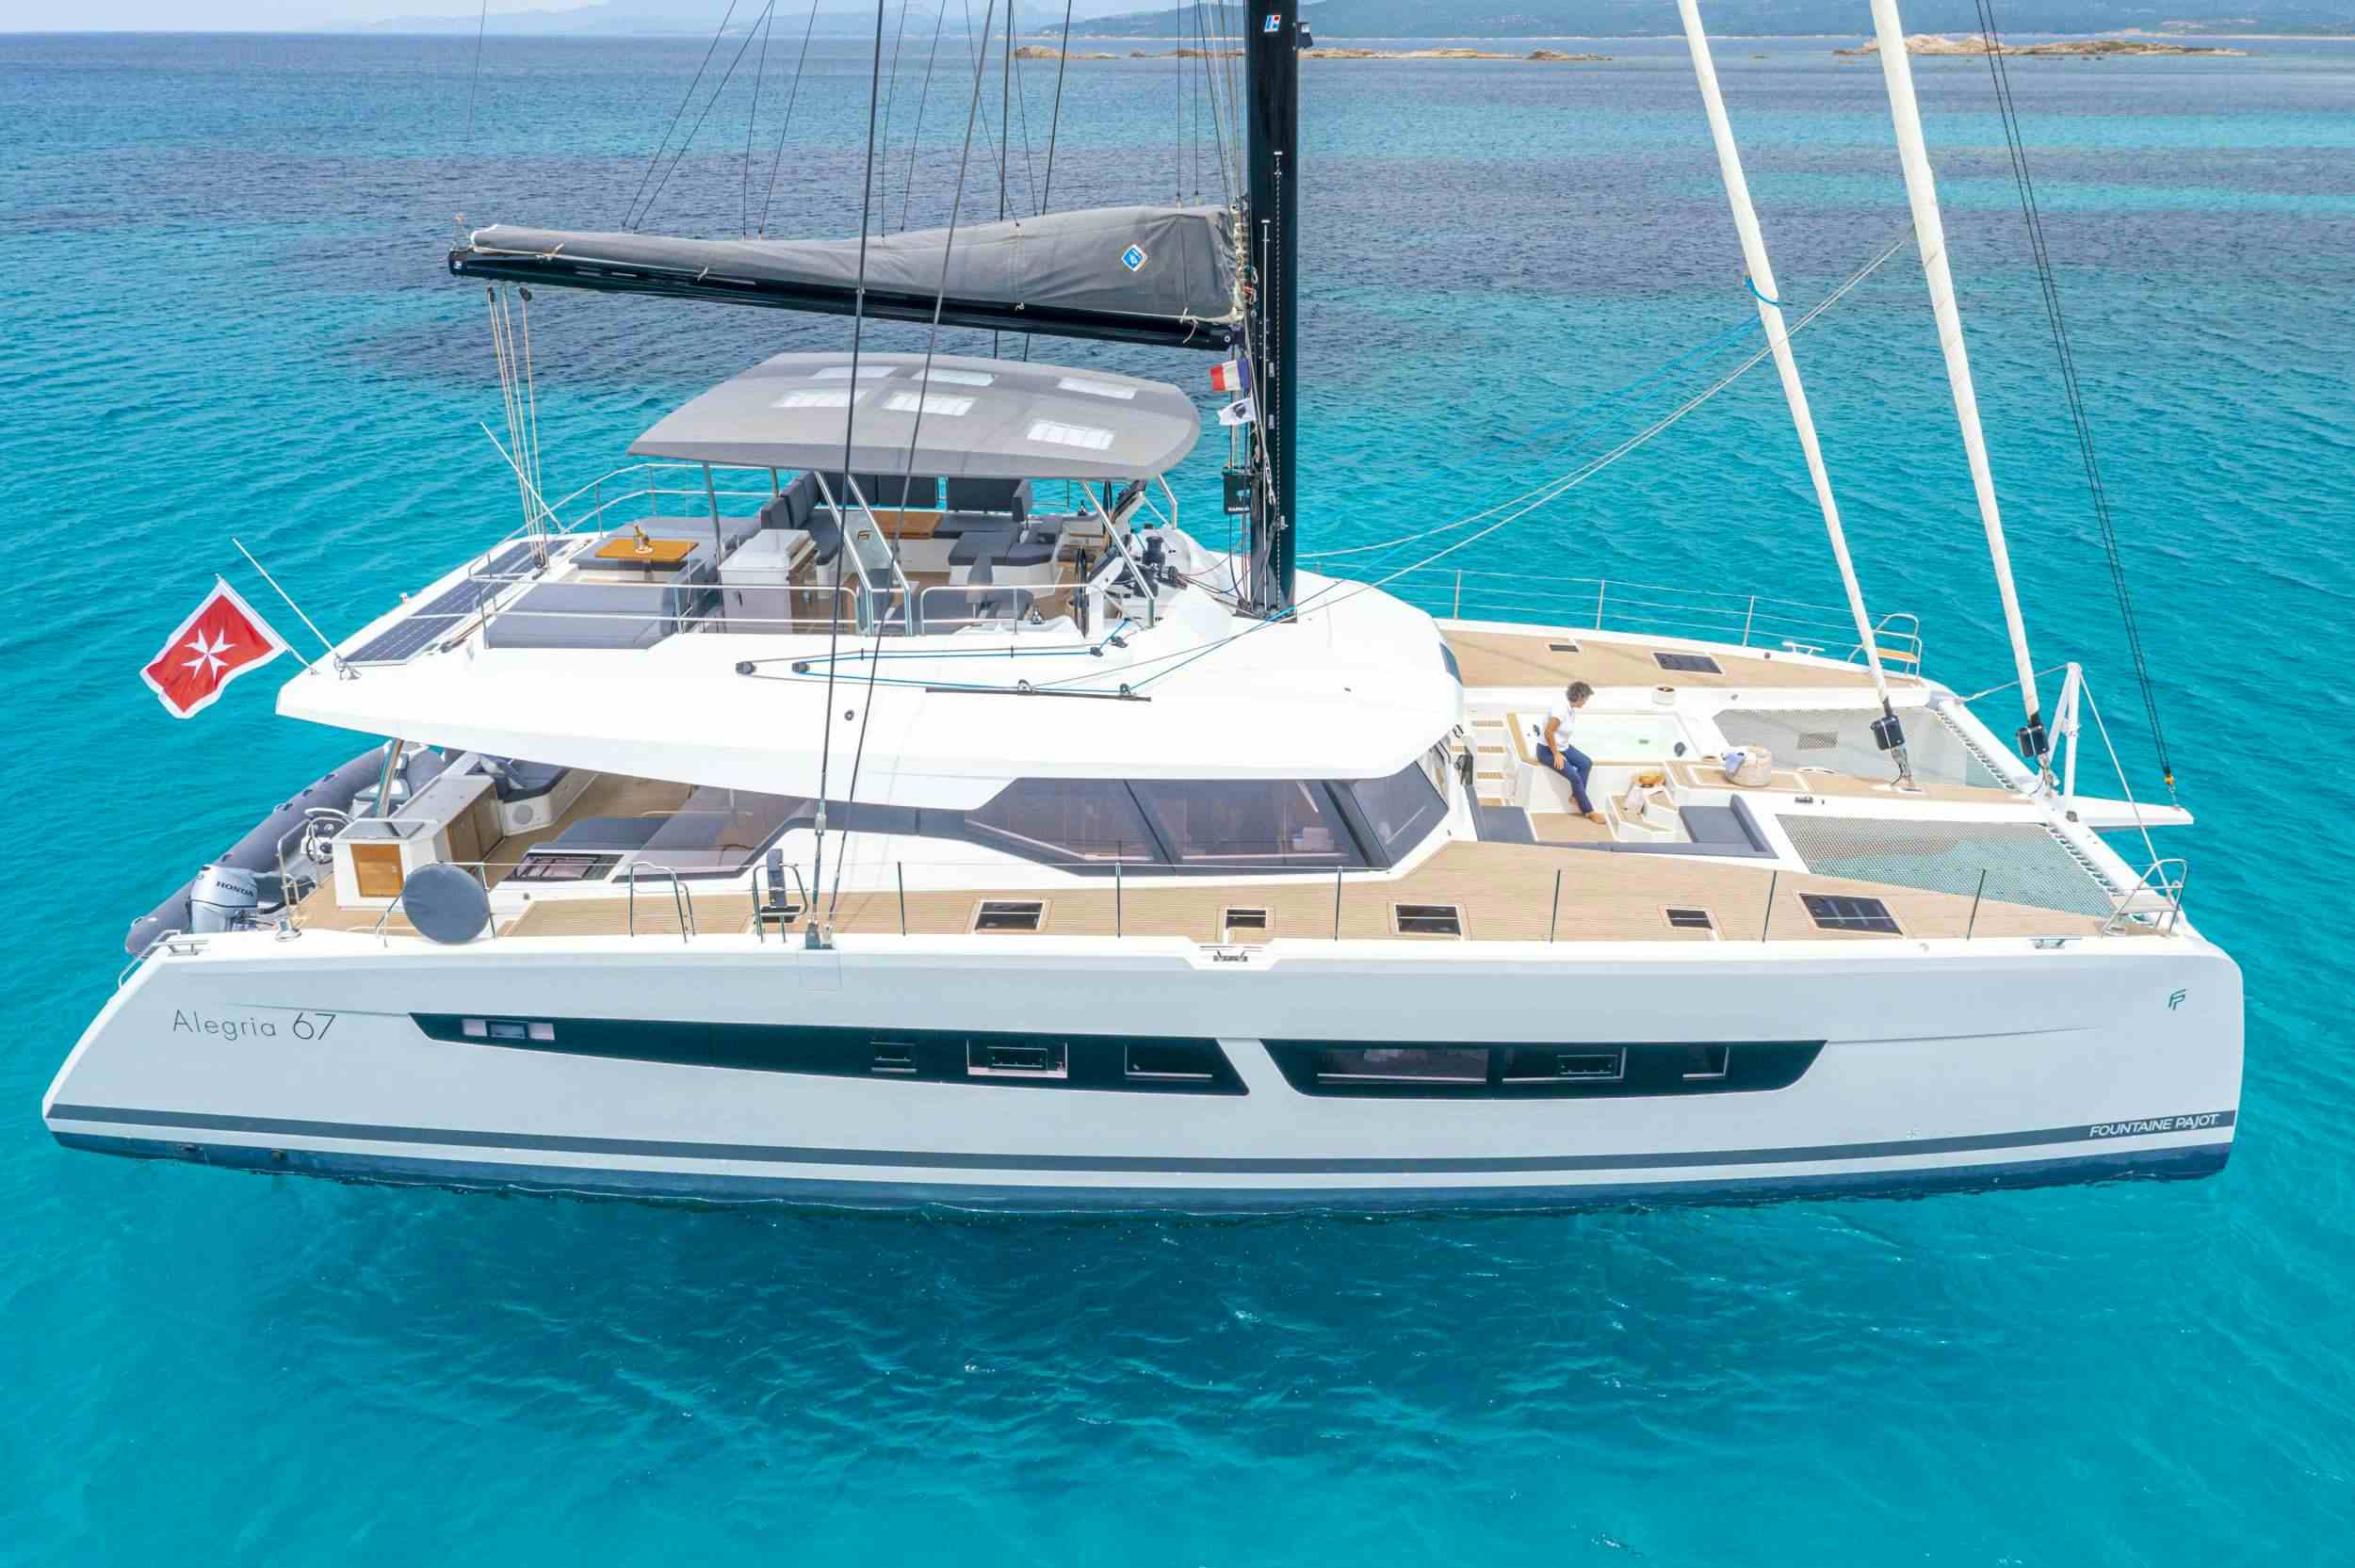 SEMPER FIDELIS  - Yacht Charter Martinique & Boat hire in Bahamas & Caribbean 1